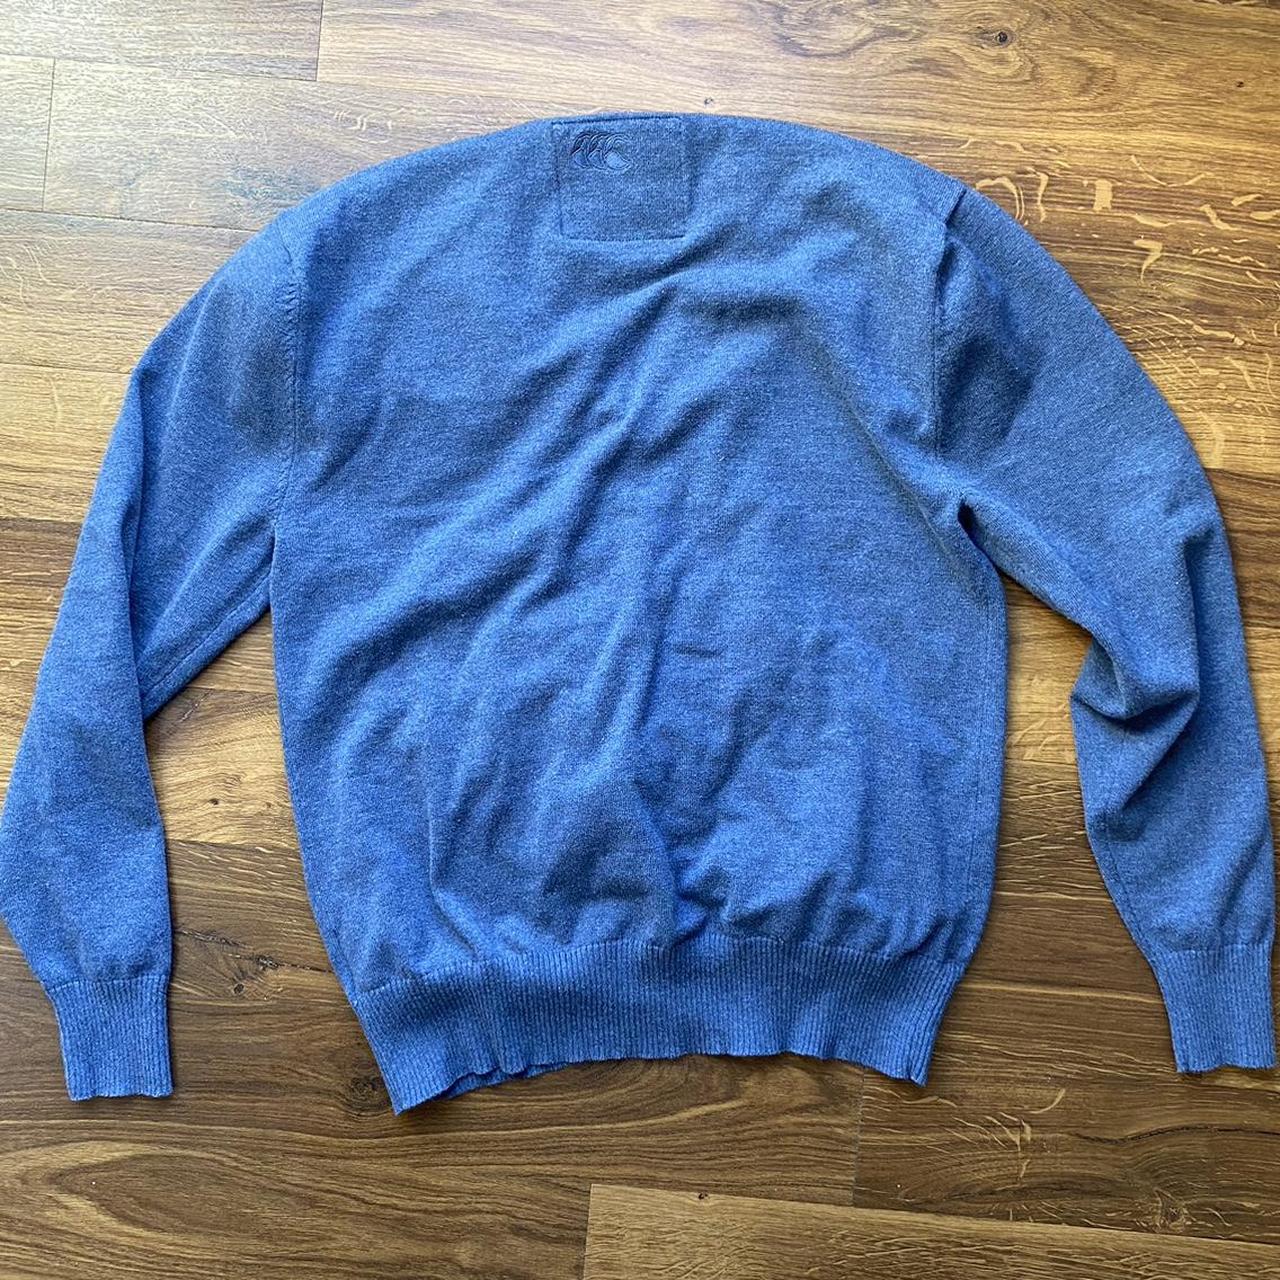 Canterbury Men's Blue and White Jumper (4)